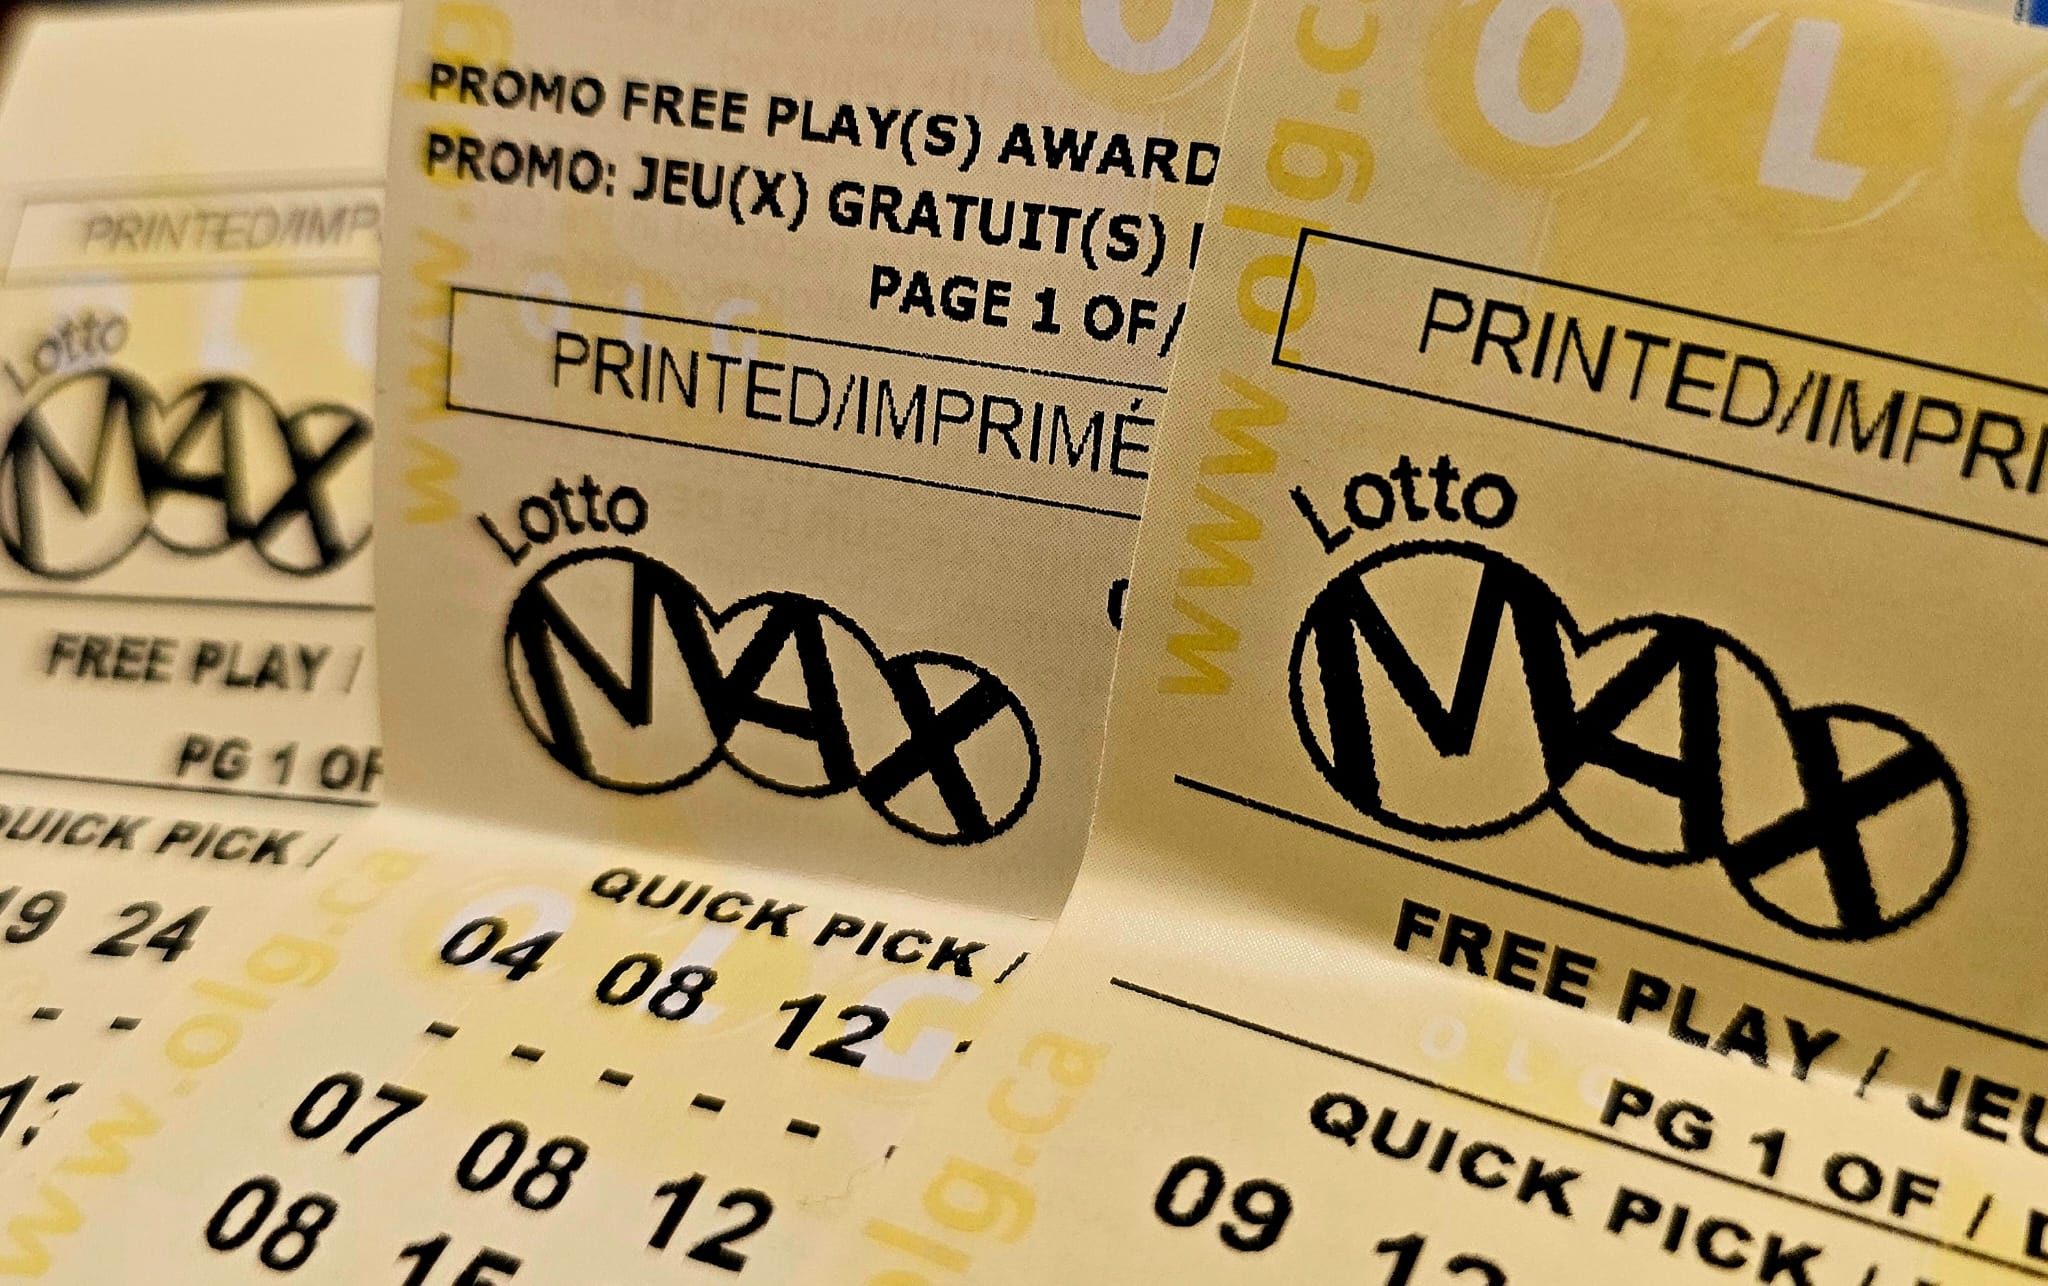 Here's who won the $70 million lottery in Ontario